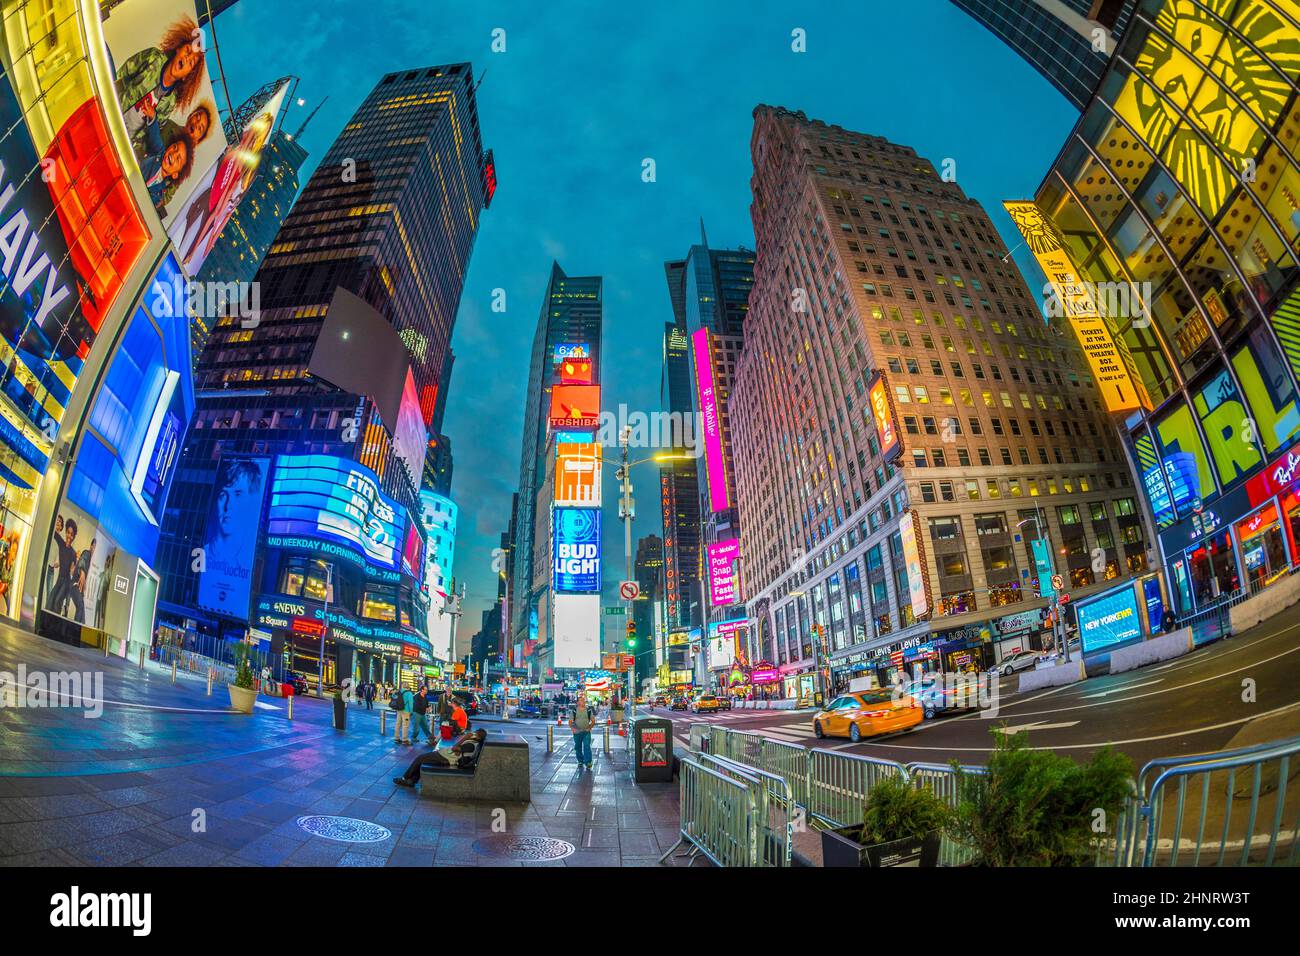 neon advertising of News, brands and theaters at times square in late afternoon Stock Photo